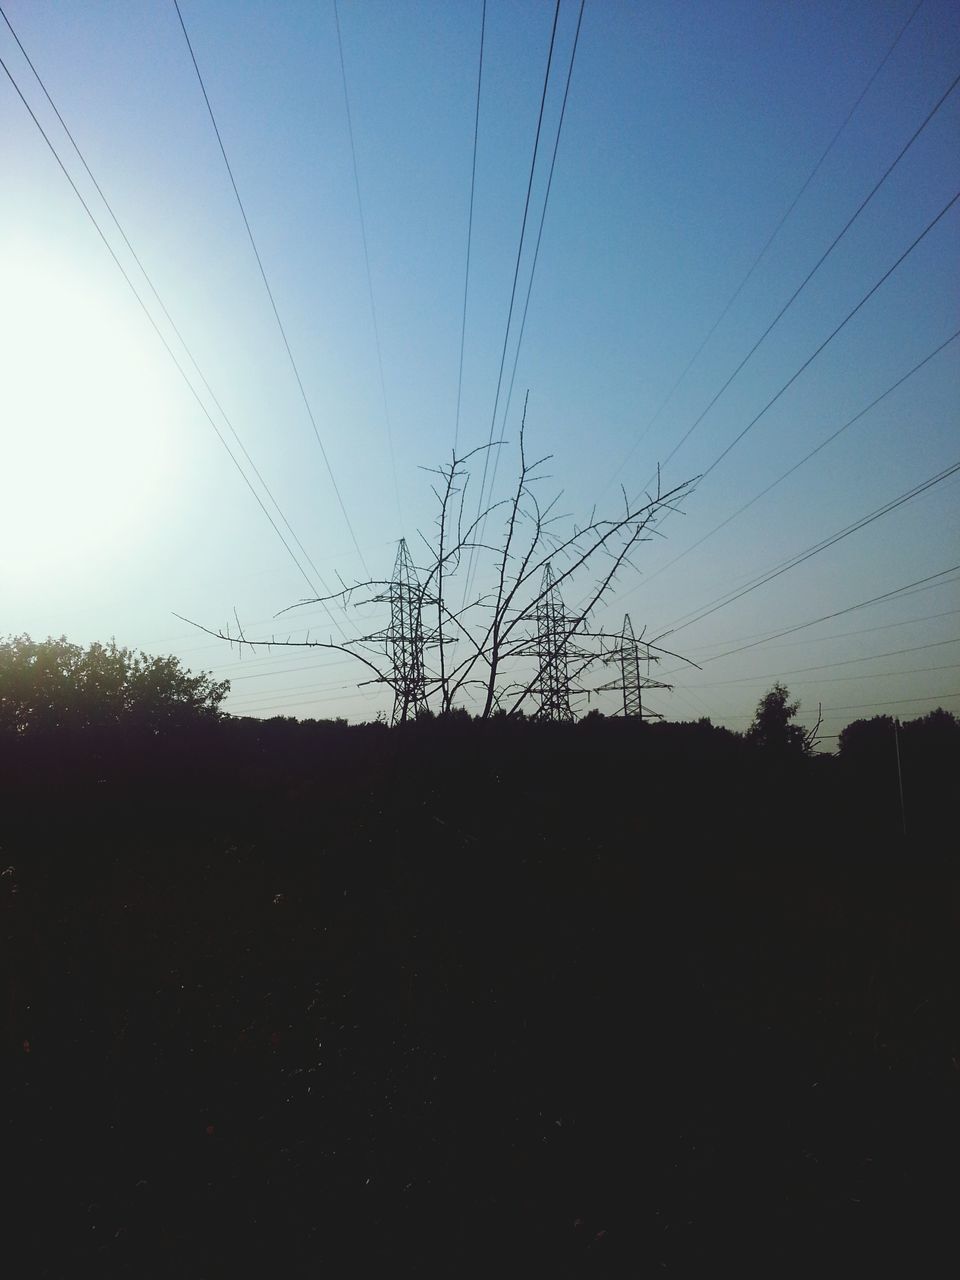 power line, silhouette, electricity pylon, electricity, power supply, cable, sunset, tranquility, landscape, connection, tranquil scene, sky, clear sky, nature, scenics, field, tree, fuel and power generation, beauty in nature, dusk